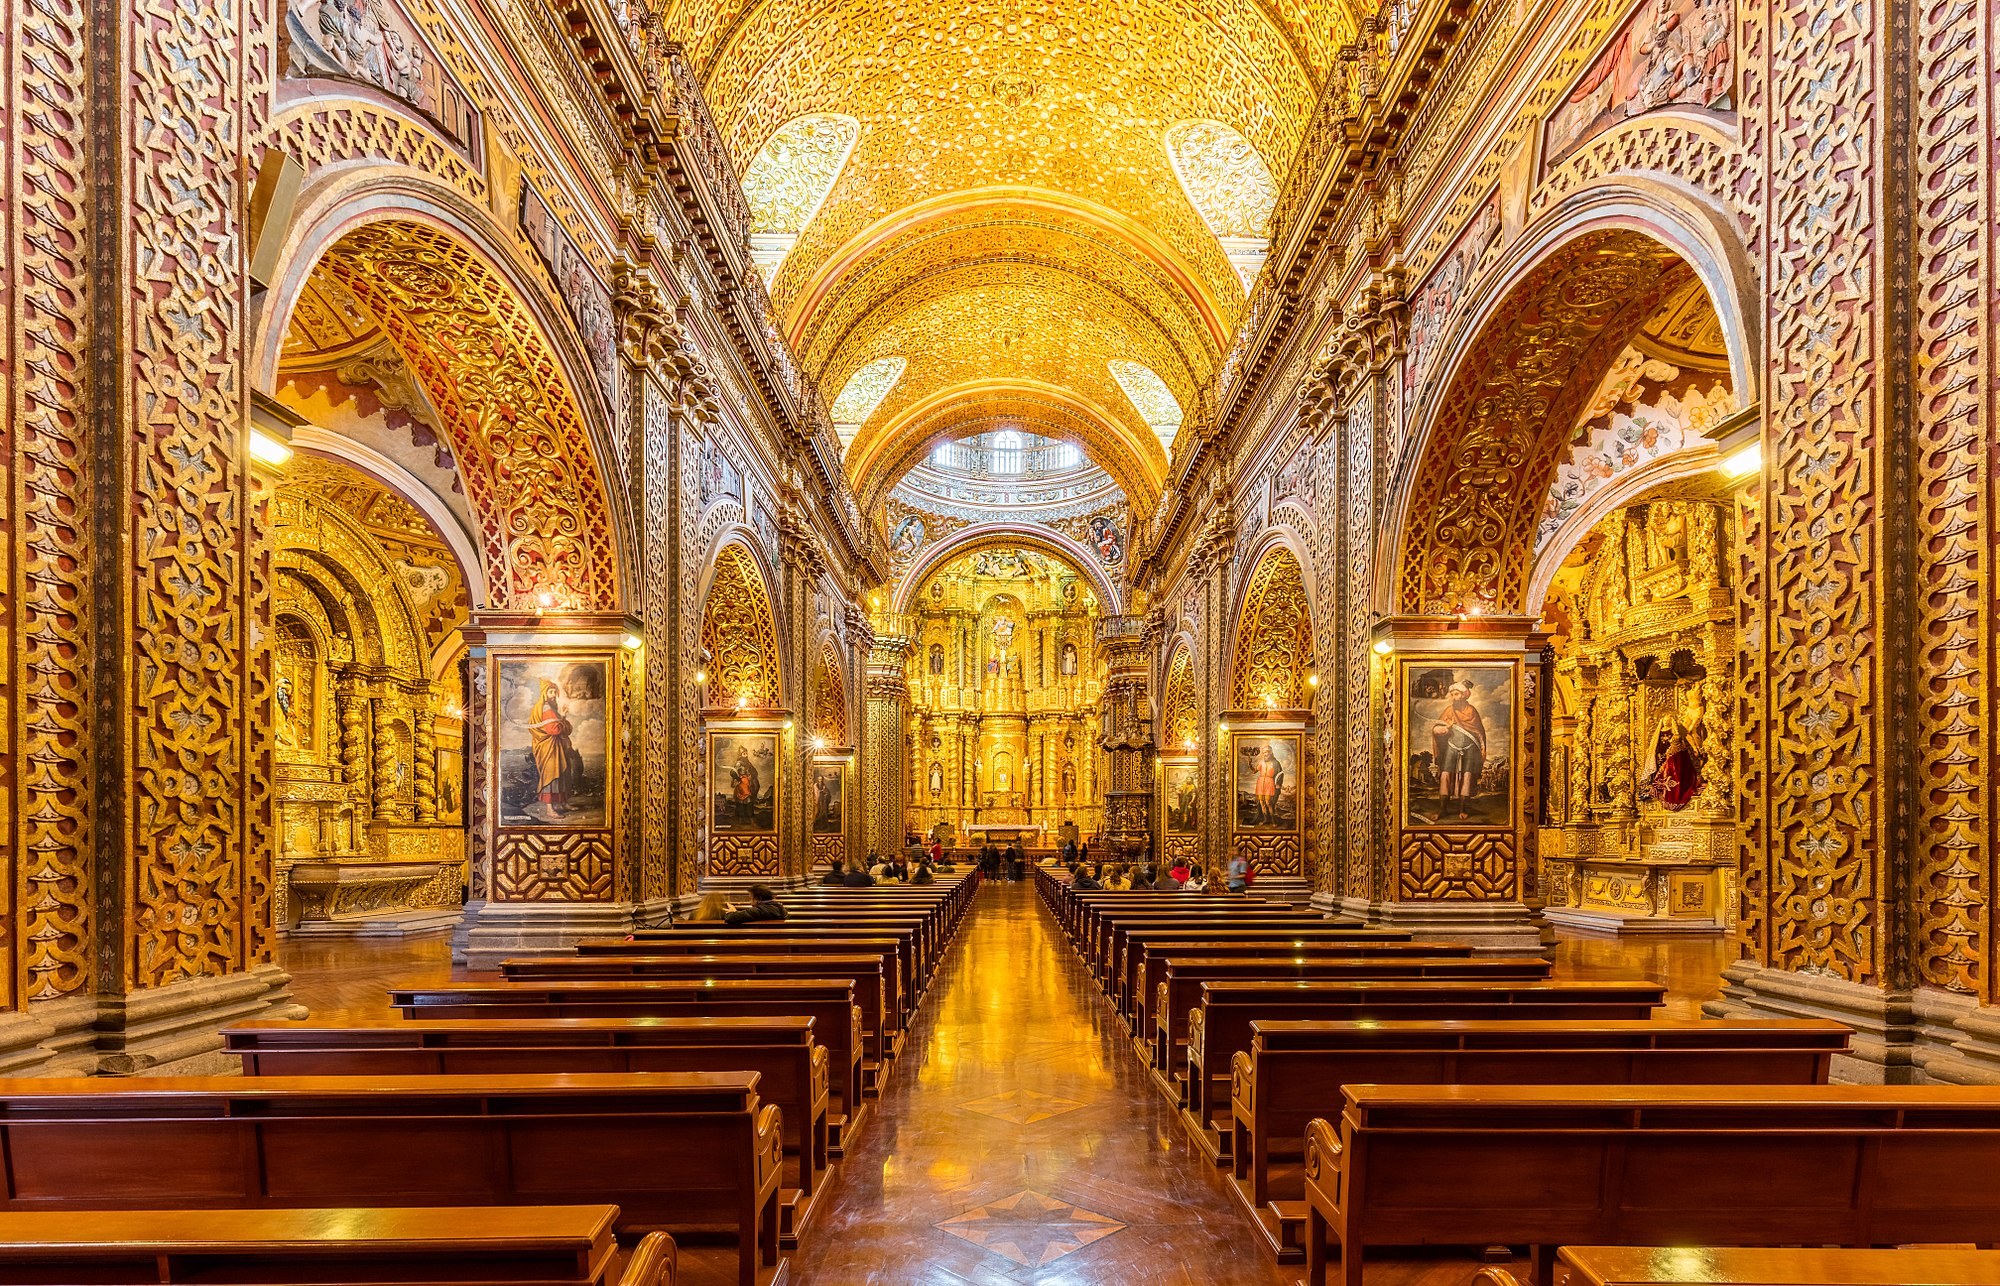 Main nave of the Church of the Society of Jesus (La Iglesia de la Compañía de Jesús), a Jesuit church in Quito, Ecuador. The exterior doesn't give an idea of the beauty of the interior, with a large central nave, which is profusely decorated with gold leaf, gilded plaster and wood carvings, making of it the most ornate church in Quito. The temple is one of the most significant works of Spanish Baroque architecture in America and considered the most beautiful church in Ecuador.